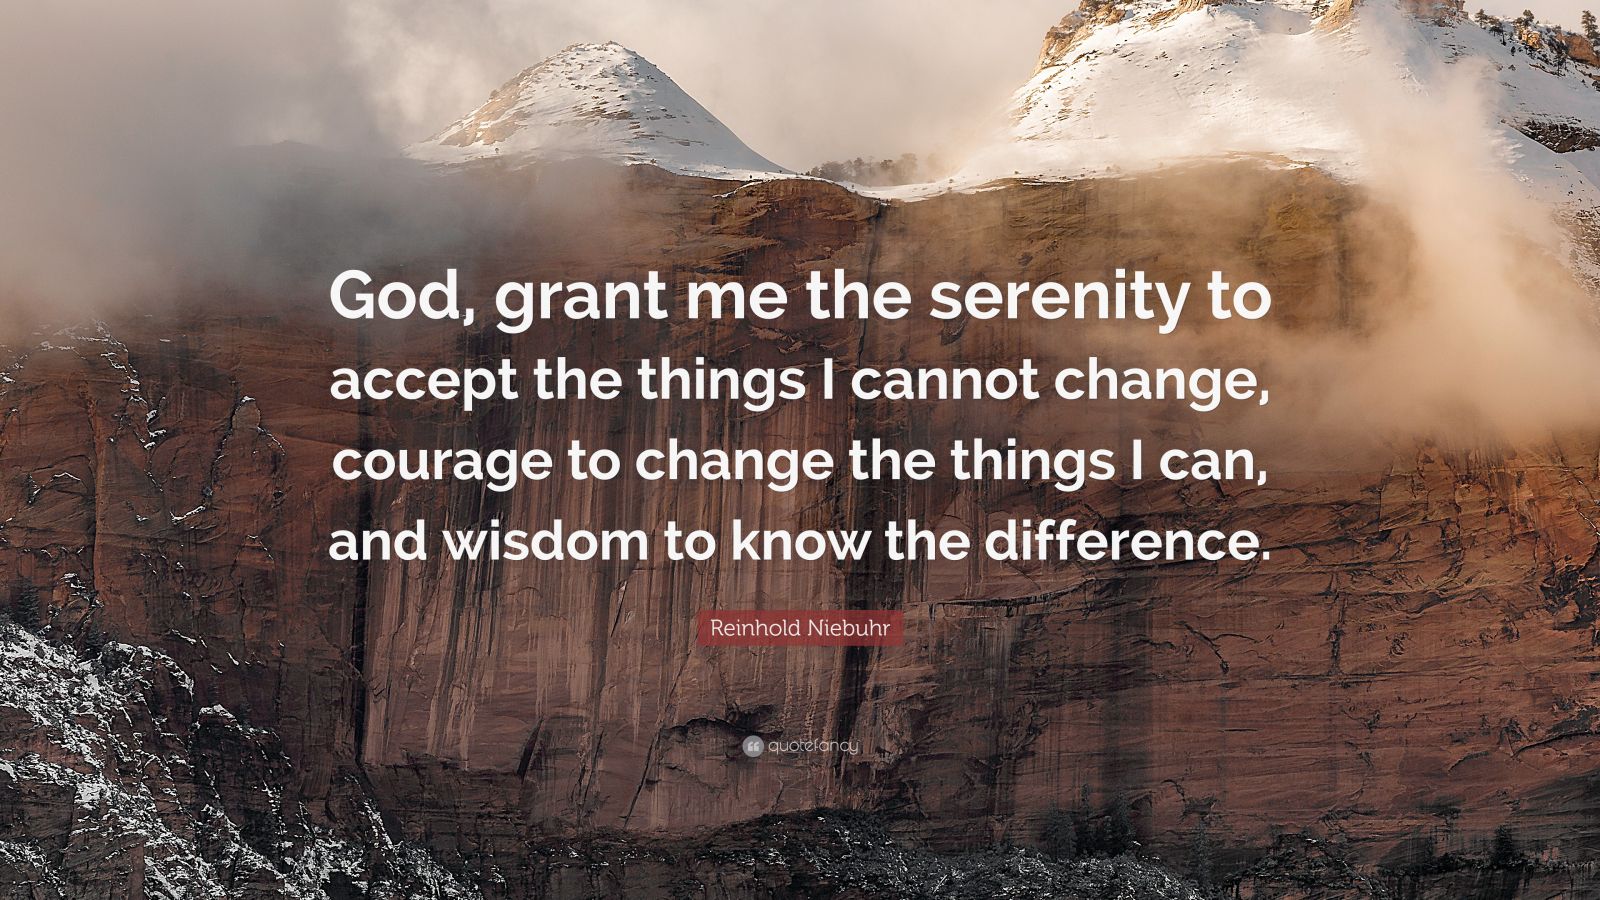 Reinhold Niebuhr Quote: “God grant me the serenity to accept the things ...